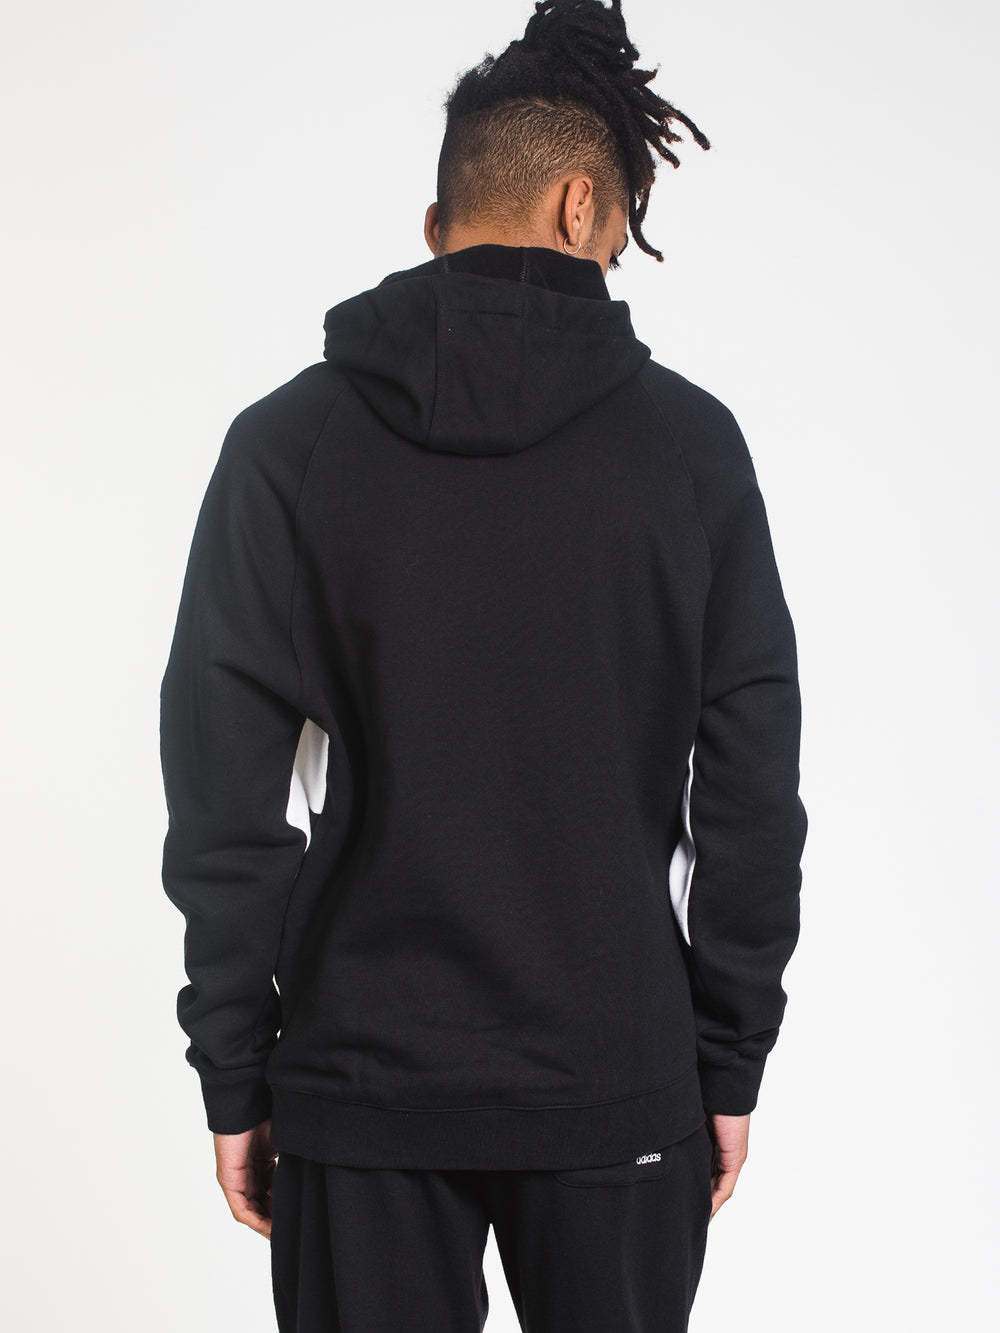 ADIDAS BIG TREFOIL PULLOVER HOODIE  - CLEARANCE